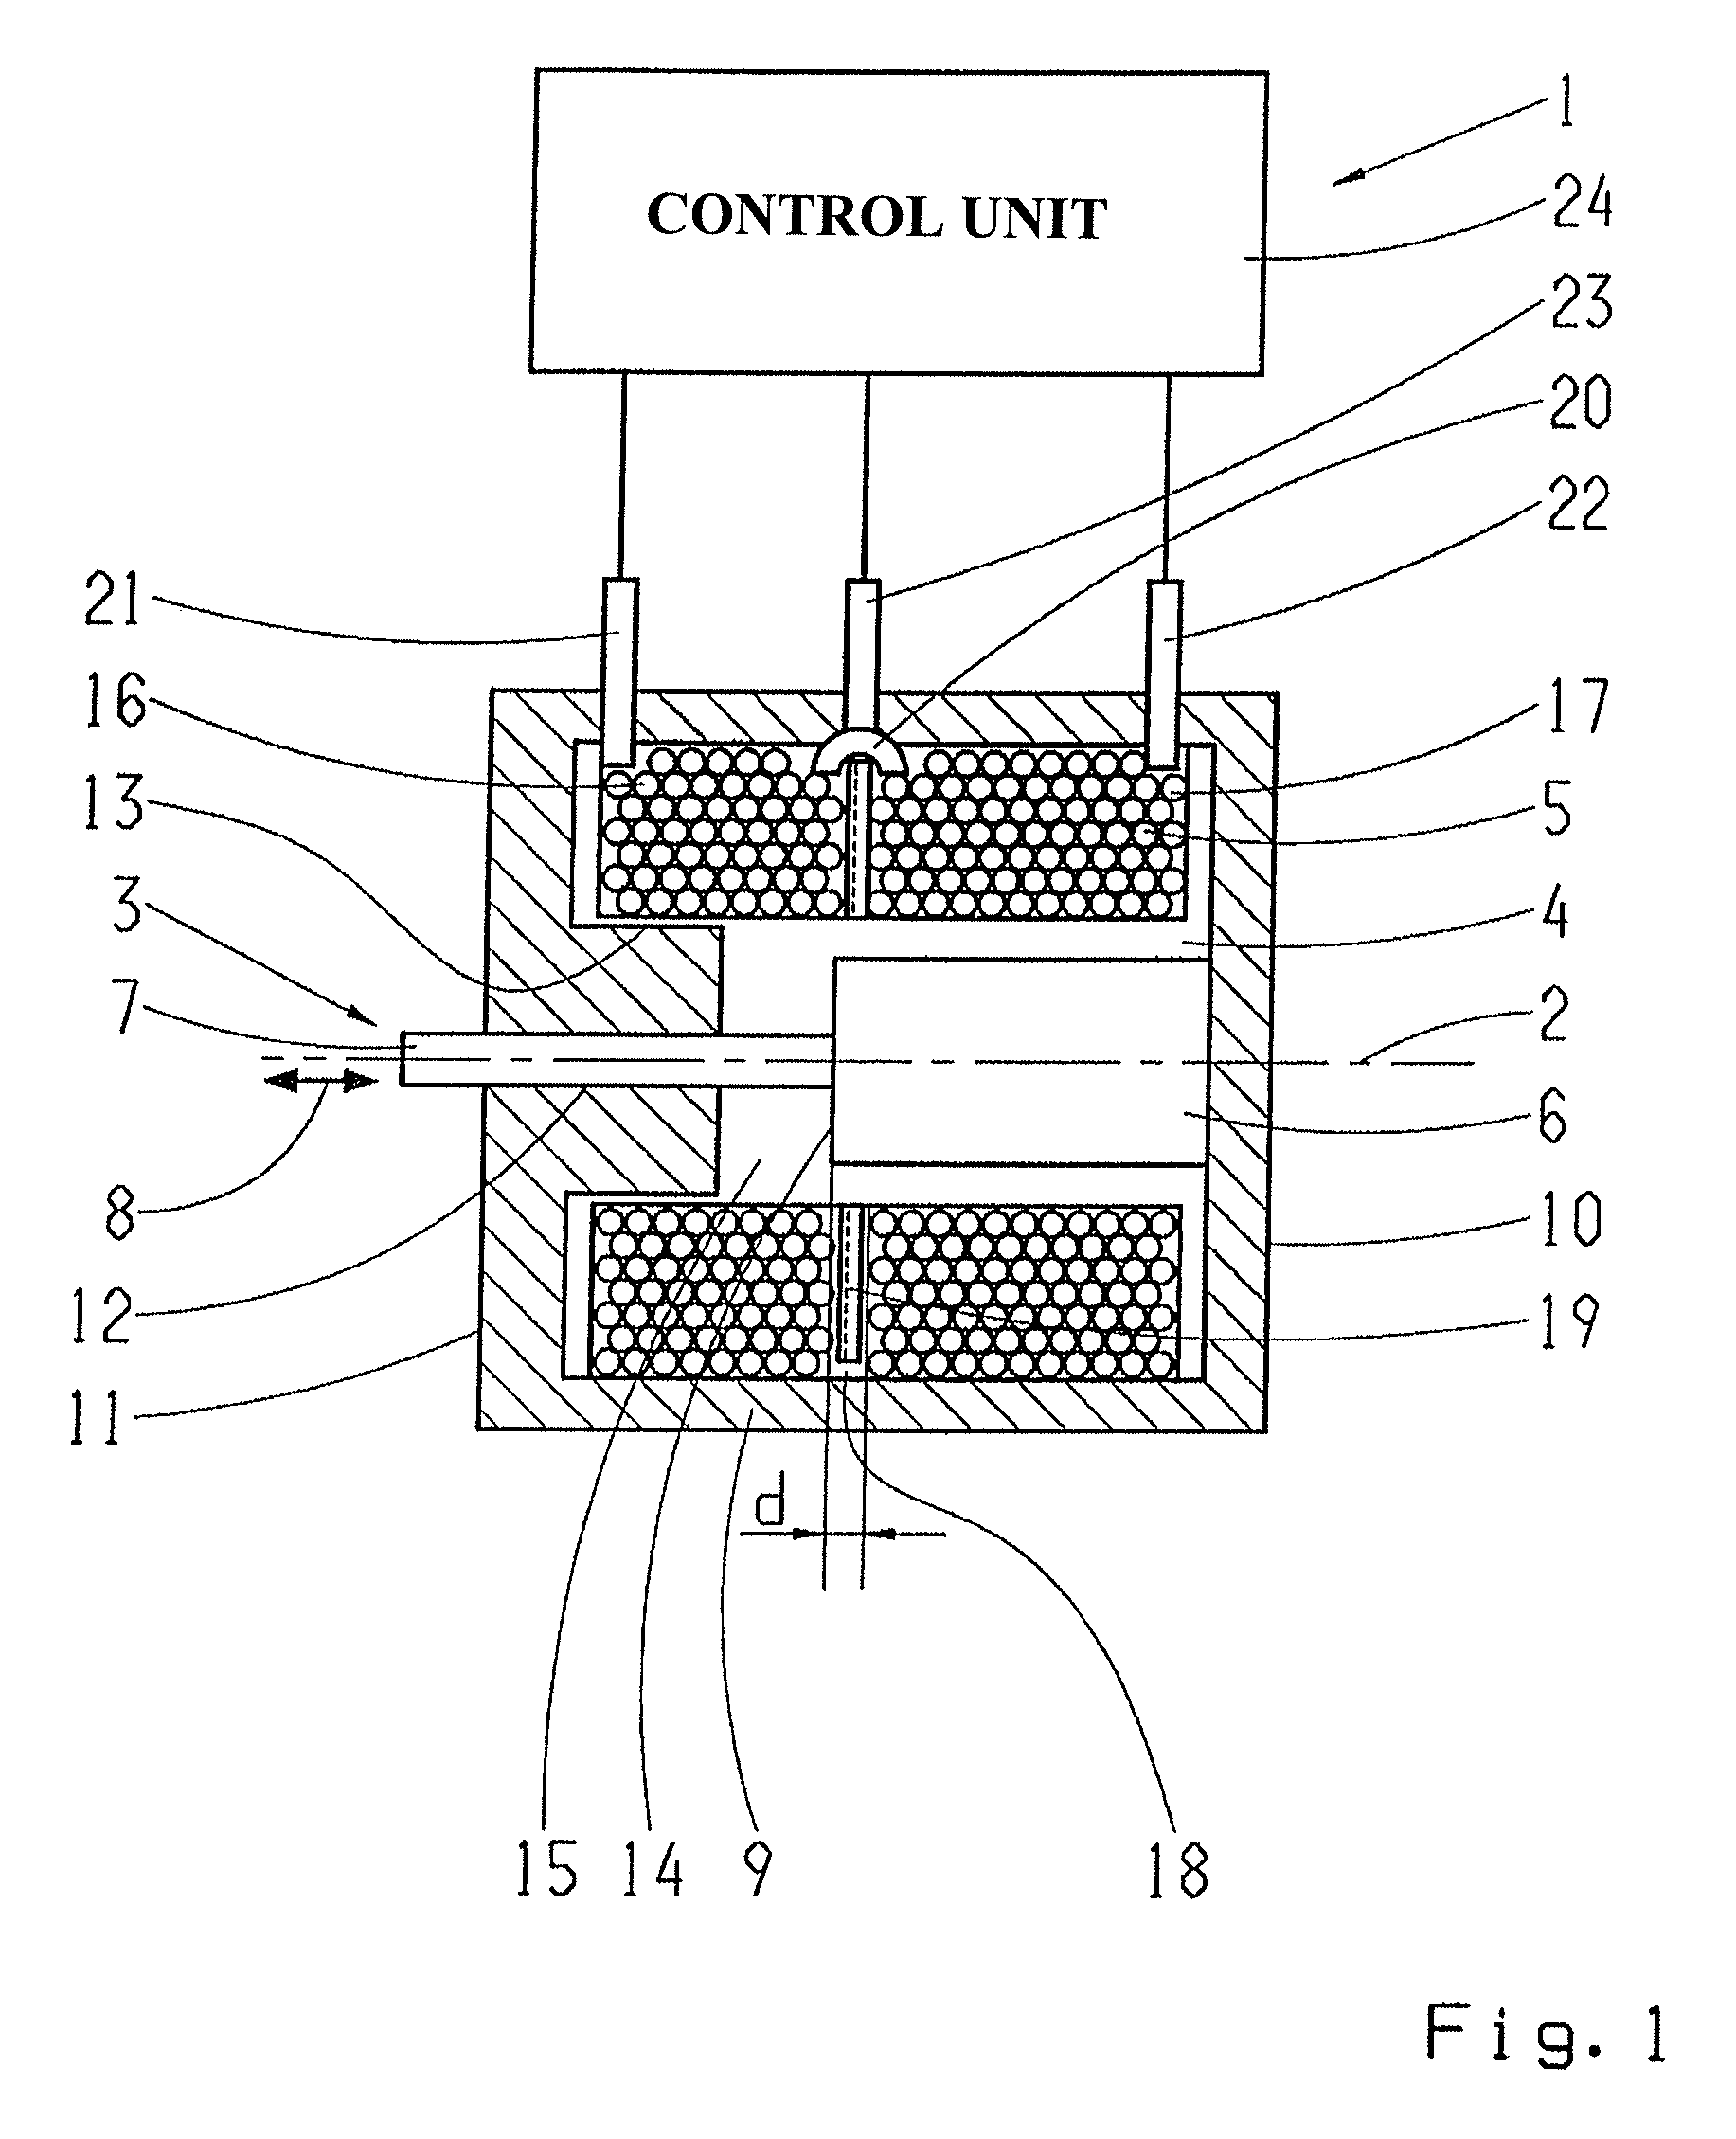 Electromagnetic actuating device with ability for position detection of an armature